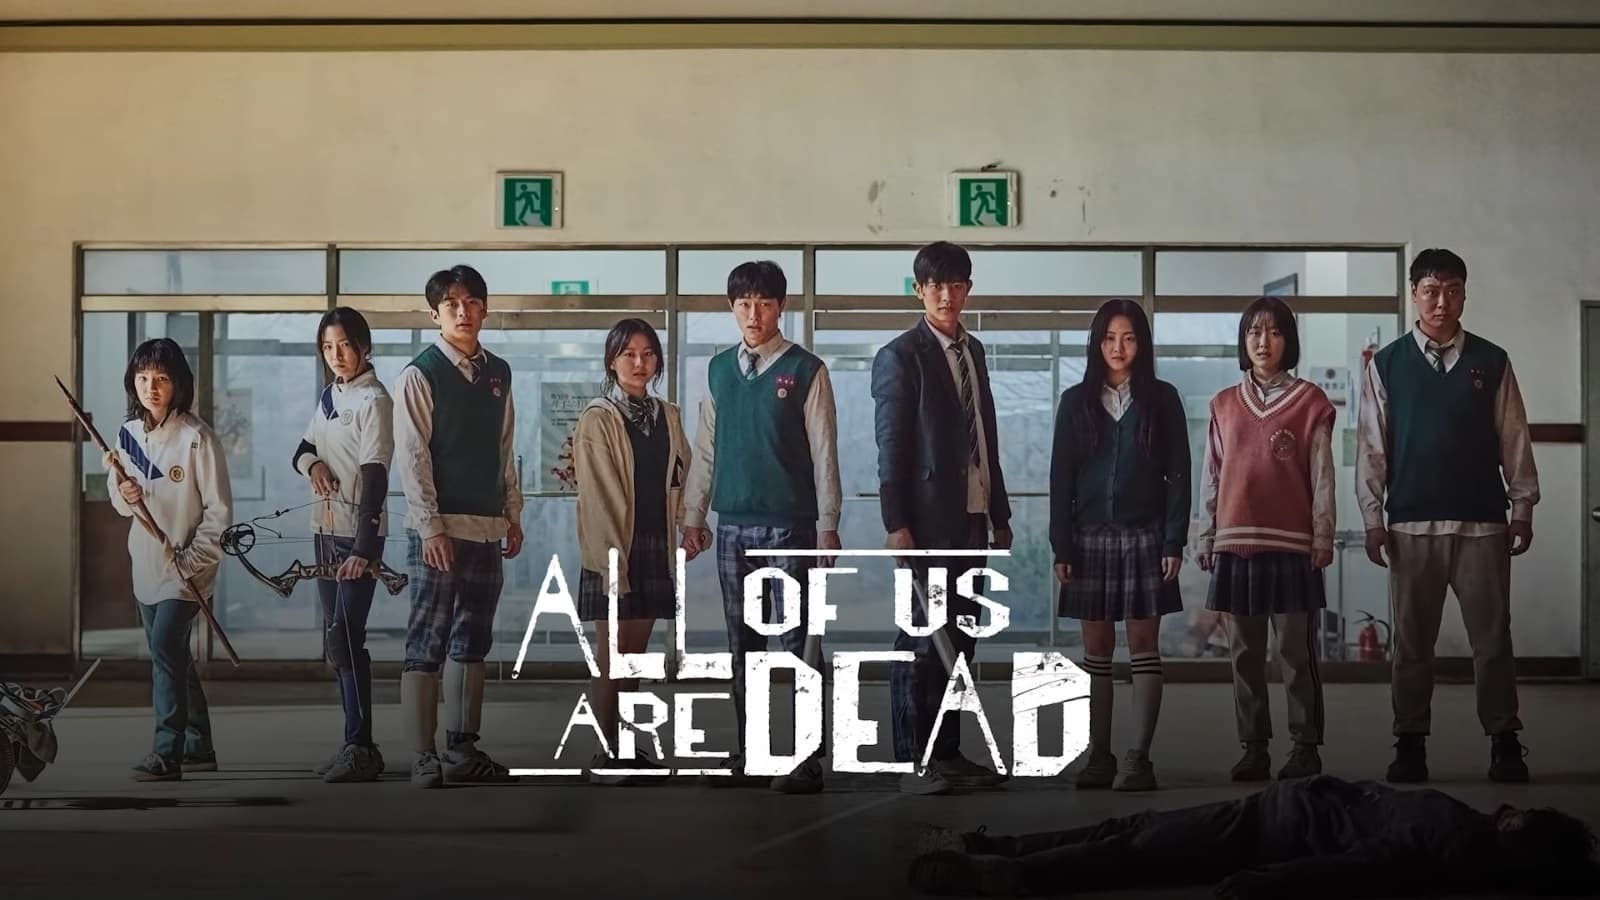 Back to school: 'All of Us Are Dead' is returning for season 2